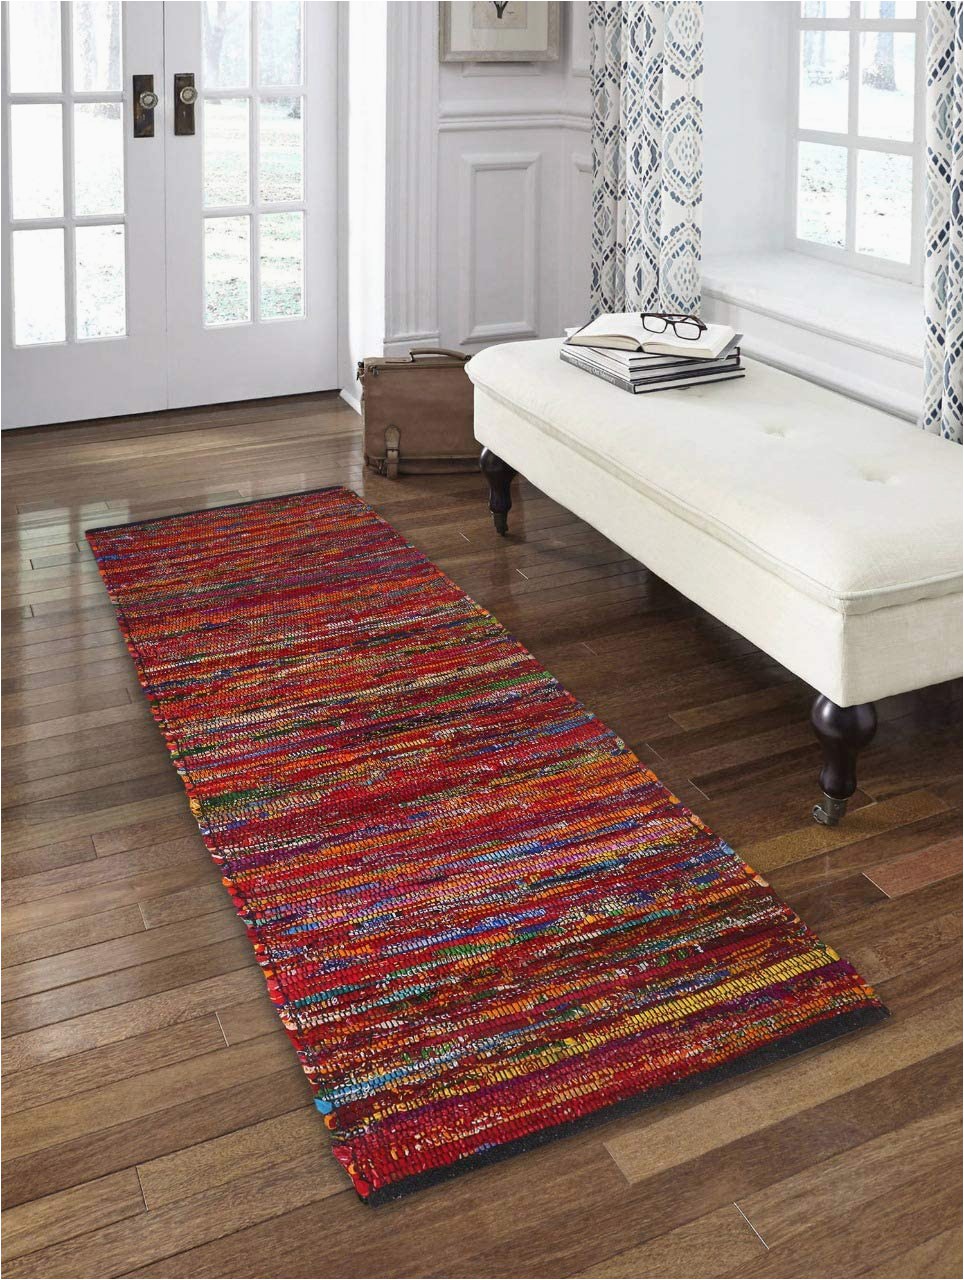 Bath Rug Runner 24 X 72 Cotton Multi Chindi Bed Runner Rugs 24×72 Inch Multi Color Cotton area Rugs Runner Bed Room Rugs Runnner Machine Washable Rugs Runner